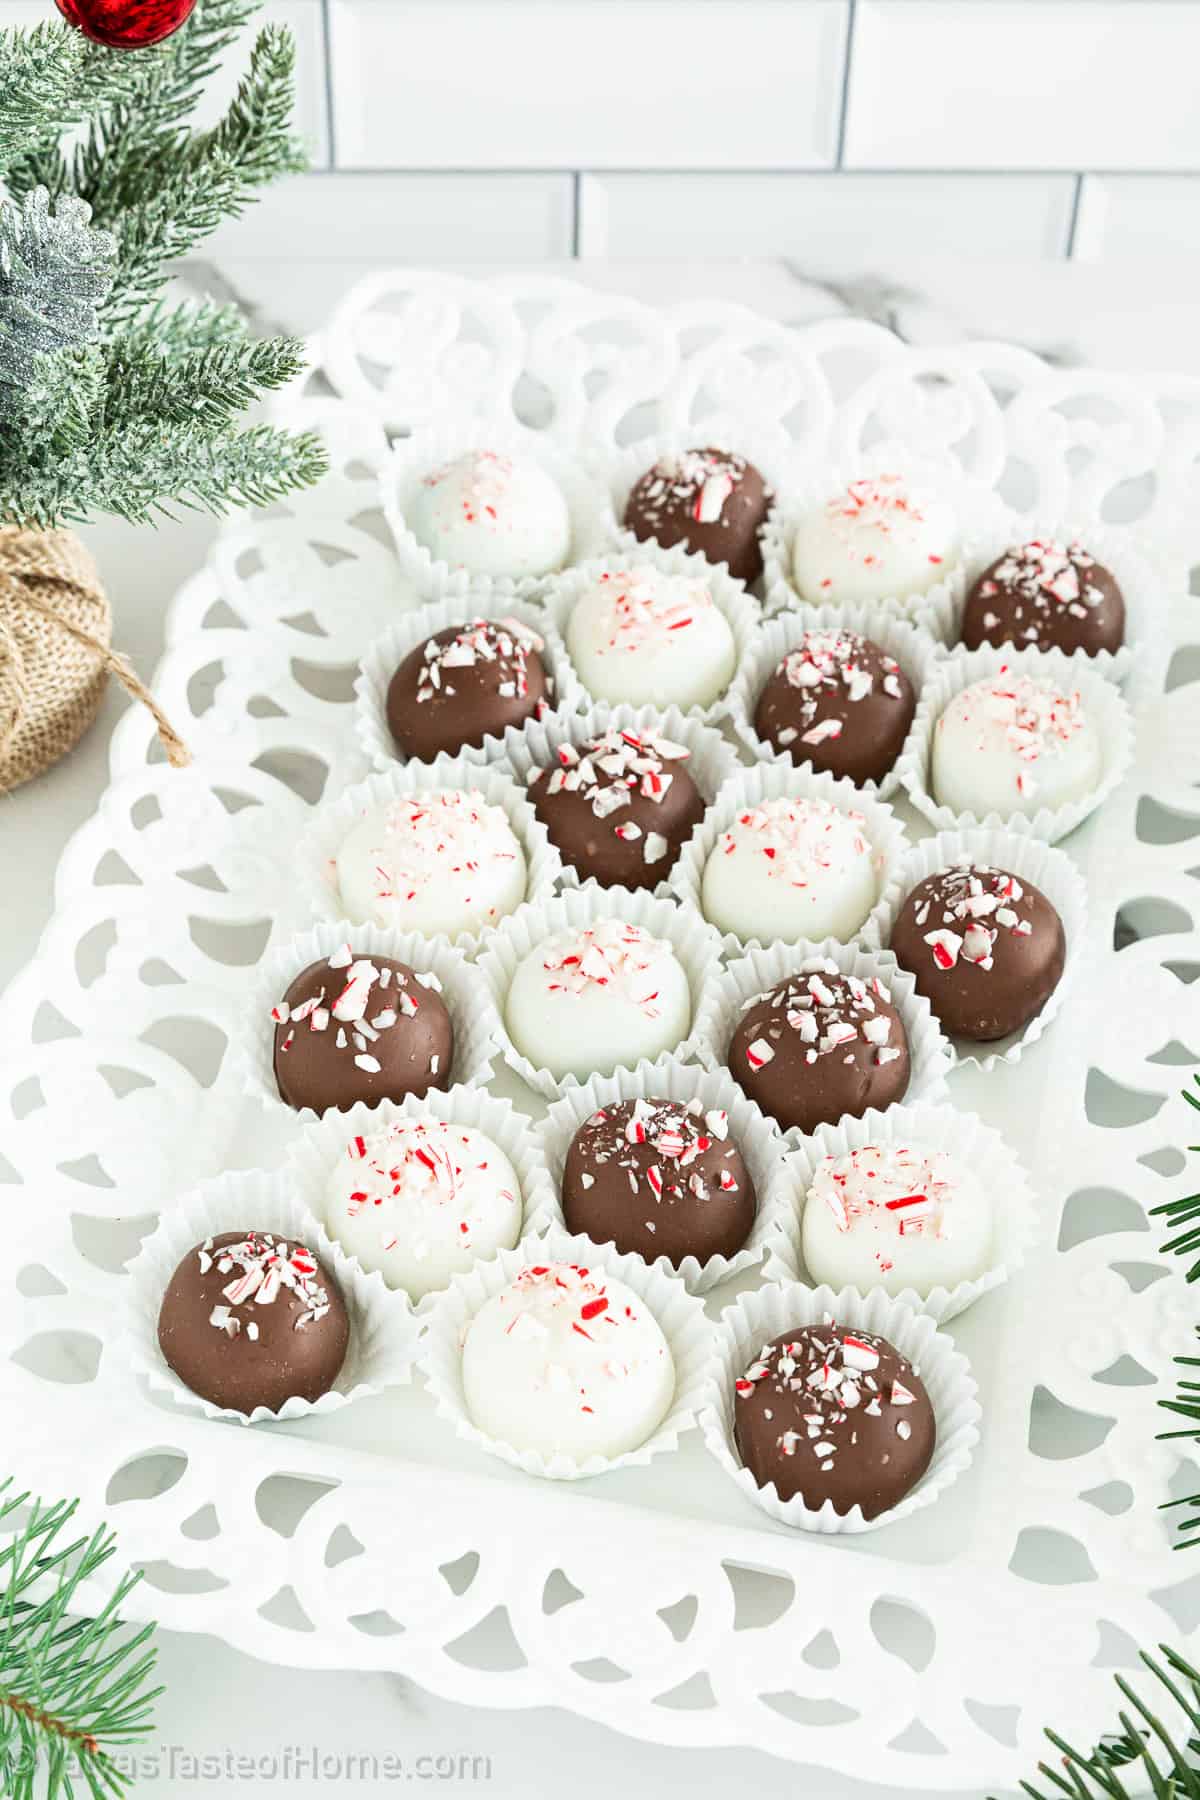 These Oreo Truffles are absolutely delicious and incredibly easy to make! They're made with cream cheese, crushed Oreos, and then coated with melted chocolate.